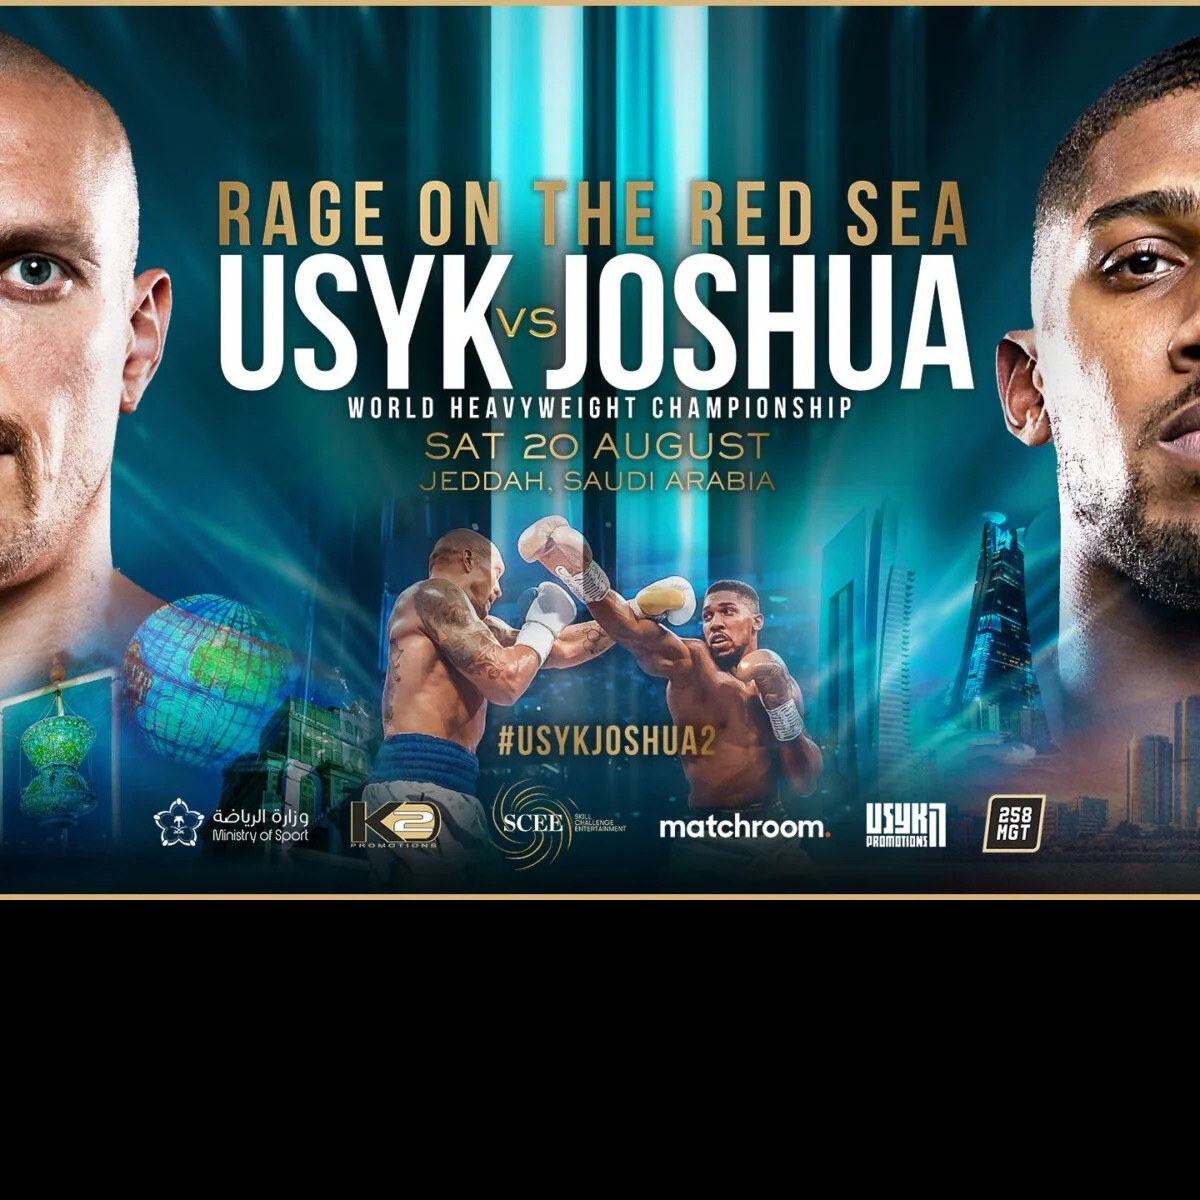 Anthony Joshua vs Oleksandr Usyk 2 Date, Time, Venue, Tickets, and Live Stream